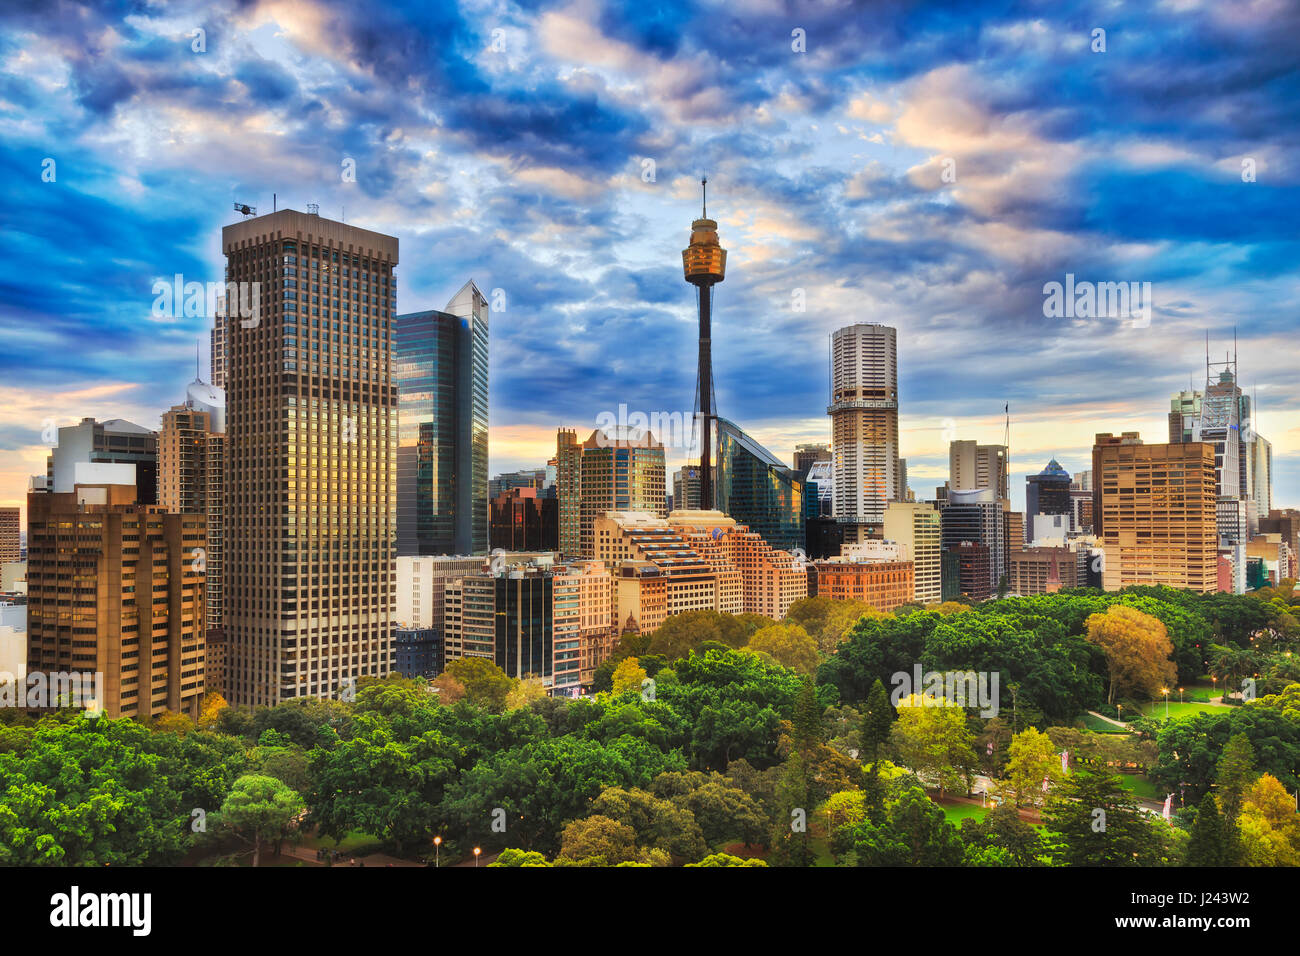 Warm sunset over Sydney city CBD towers and Hyde park trees. Australian landmark buildings and cityscape under thick clouds reflecting sun light. Stock Photo